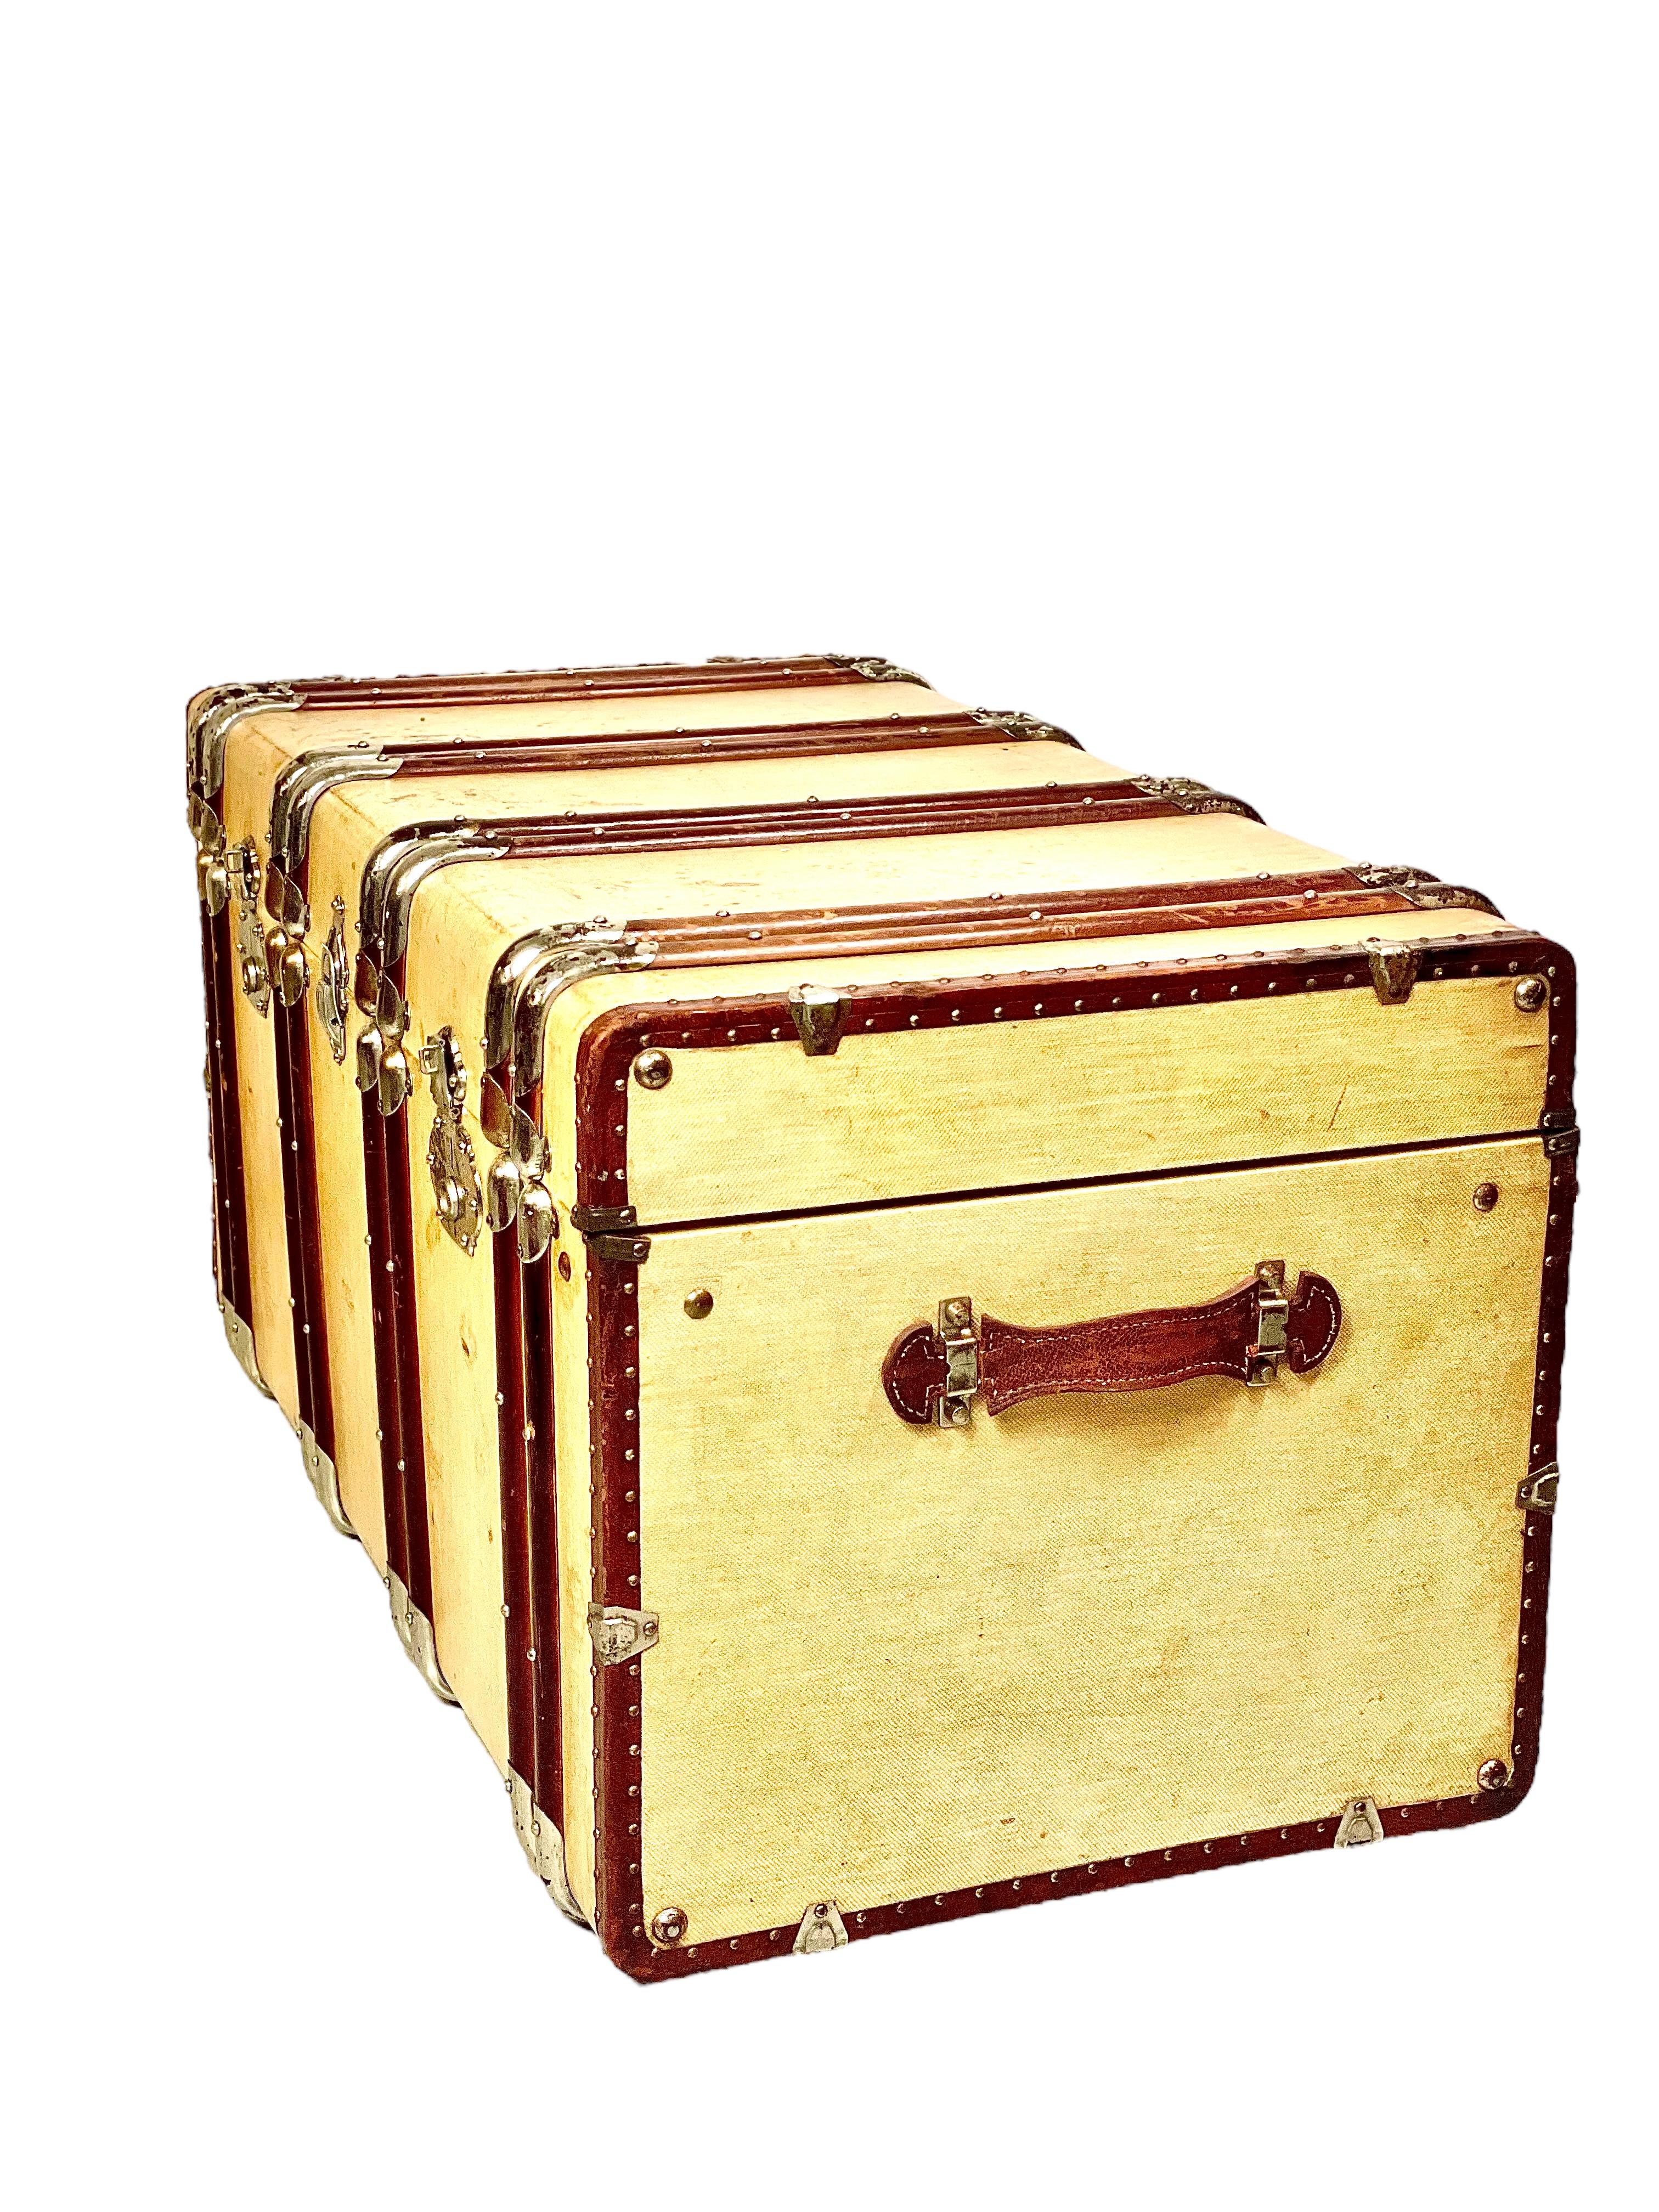 A very chic canvas-covered wooden steamer trunk, complete with sturdy leather carrying handles and very attractive vertical wood and brass banding. This wonderful vintage travelling trunk dates from the 19th century, and features a green